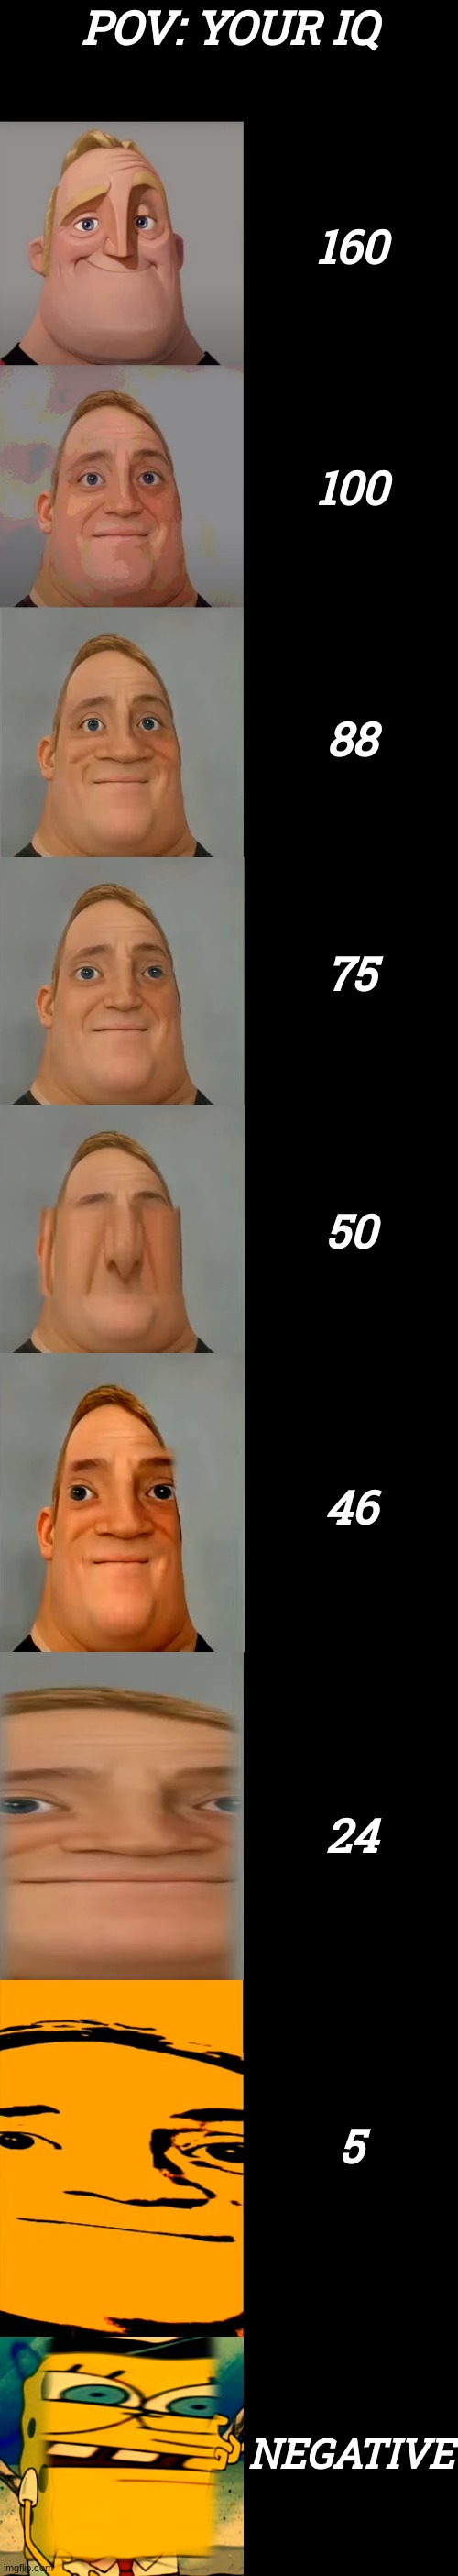 Mr Incredible becoming Idiot template | POV: YOUR IQ; 160; 100; 88; 75; 50; 46; 24; 5; NEGATIVE | image tagged in mr incredible becoming idiot template | made w/ Imgflip meme maker